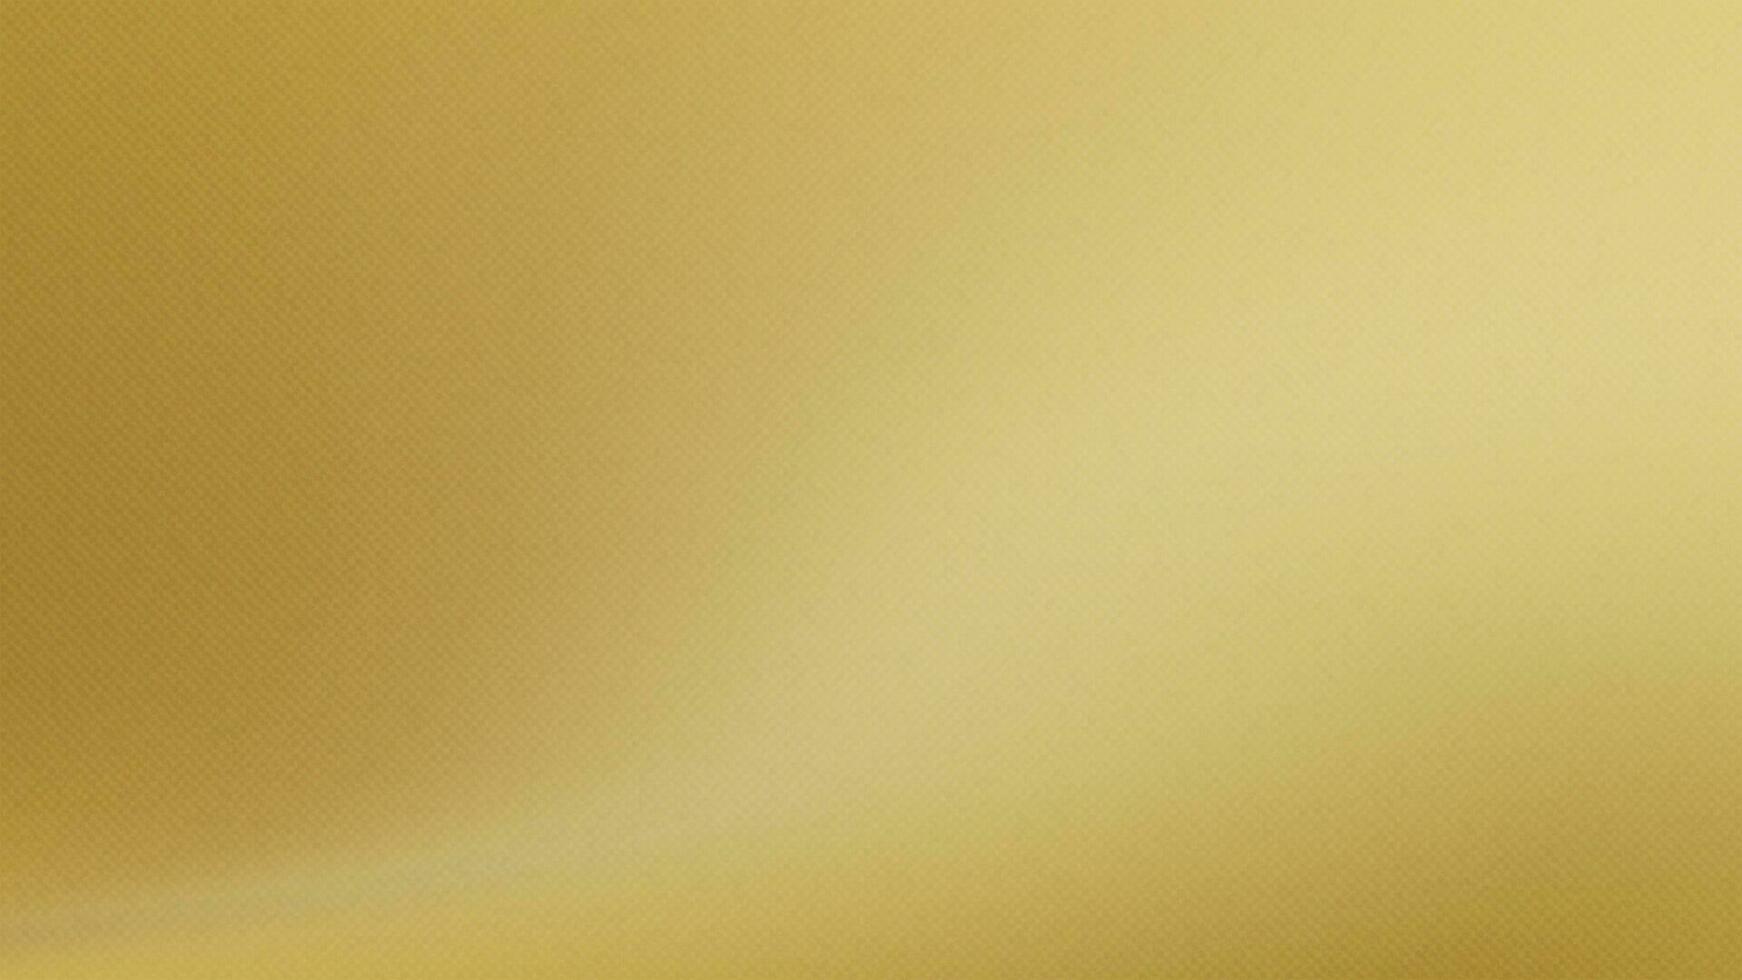 Gold background with paper texture and sunlight. Vector illustration